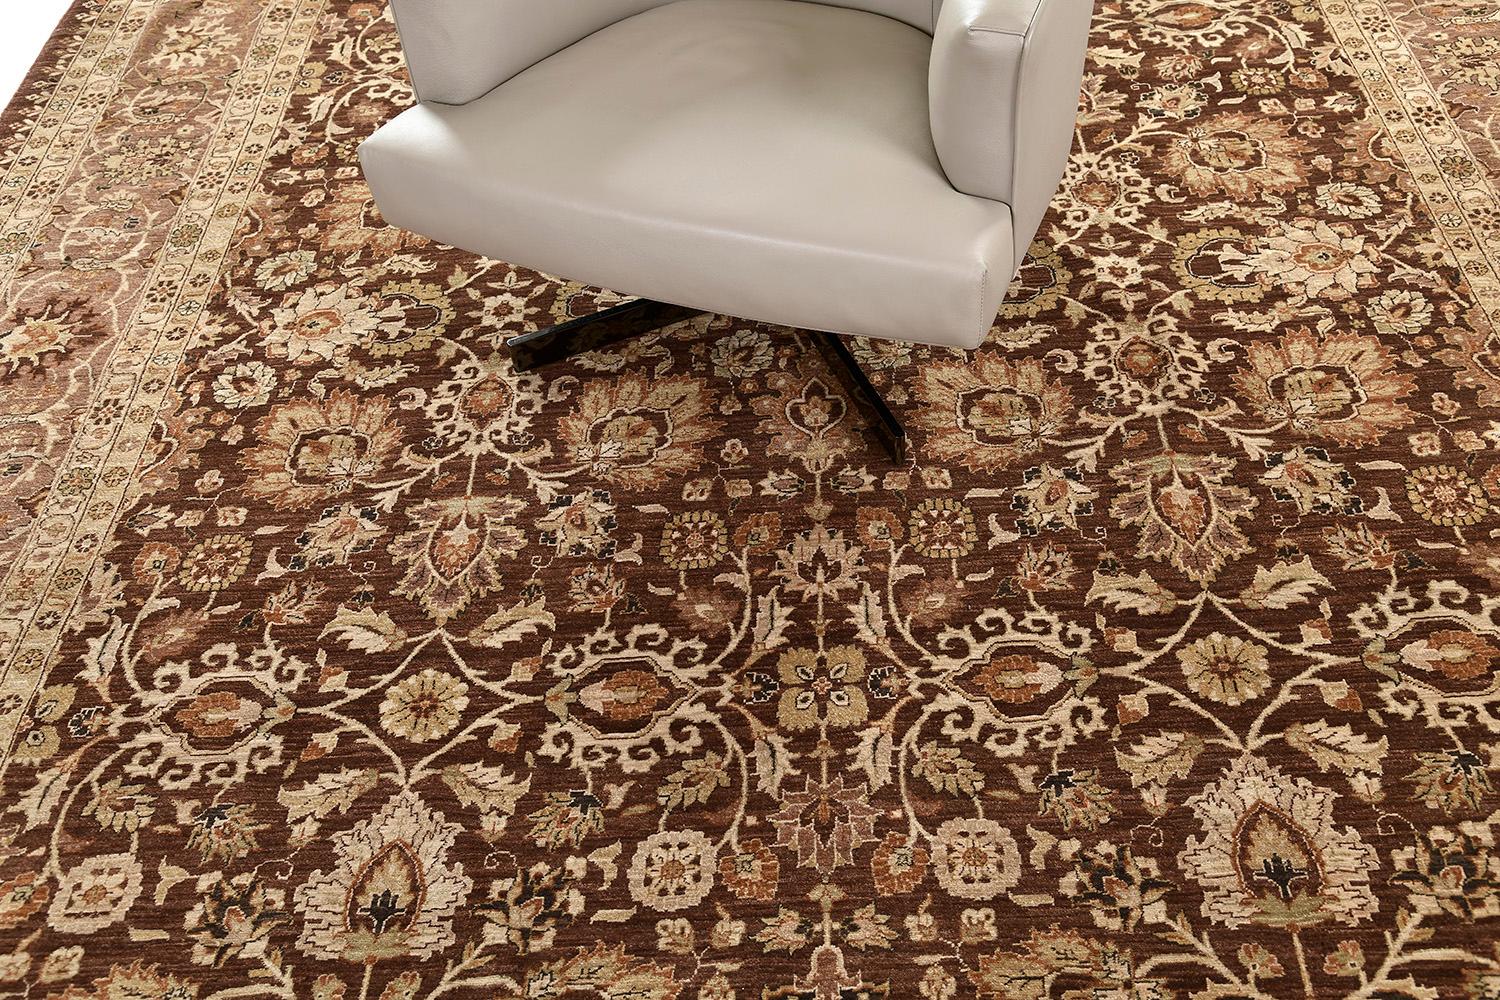 An elegant revival of Hadji Jalili has a neutral ground with sand and tan motifs that are accentuated with walnut-colored outlines. An all-over pattern that has finely rendered motifs of branching vines, palmettes, and leaf and floral clusters.